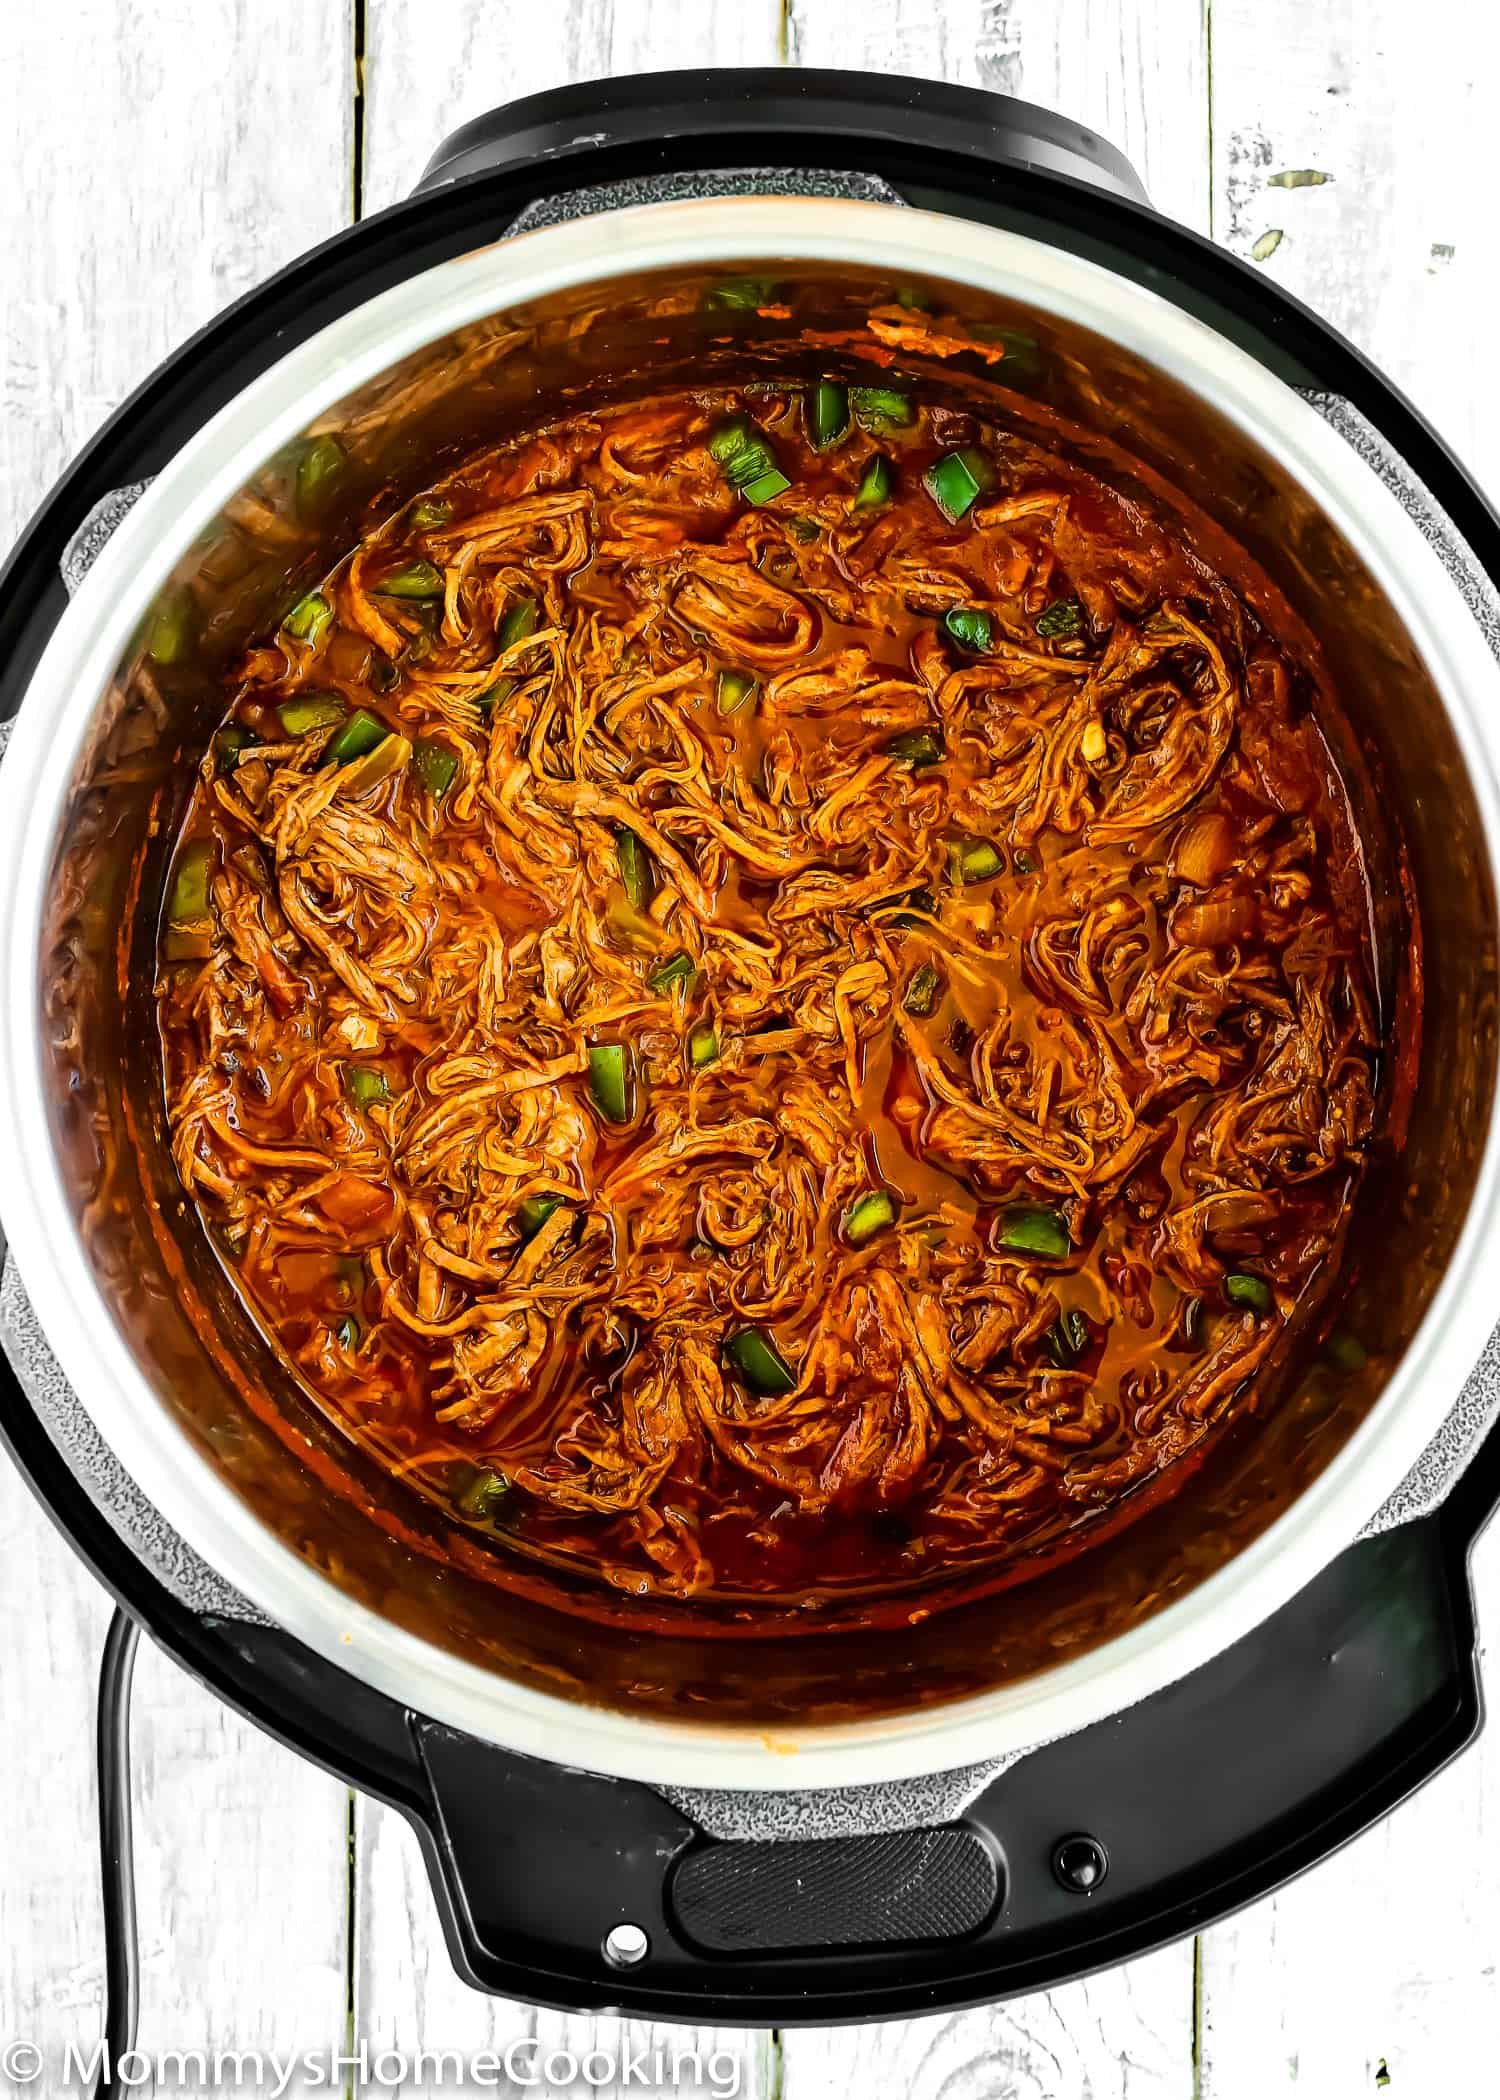 Shredded Beef in a pot